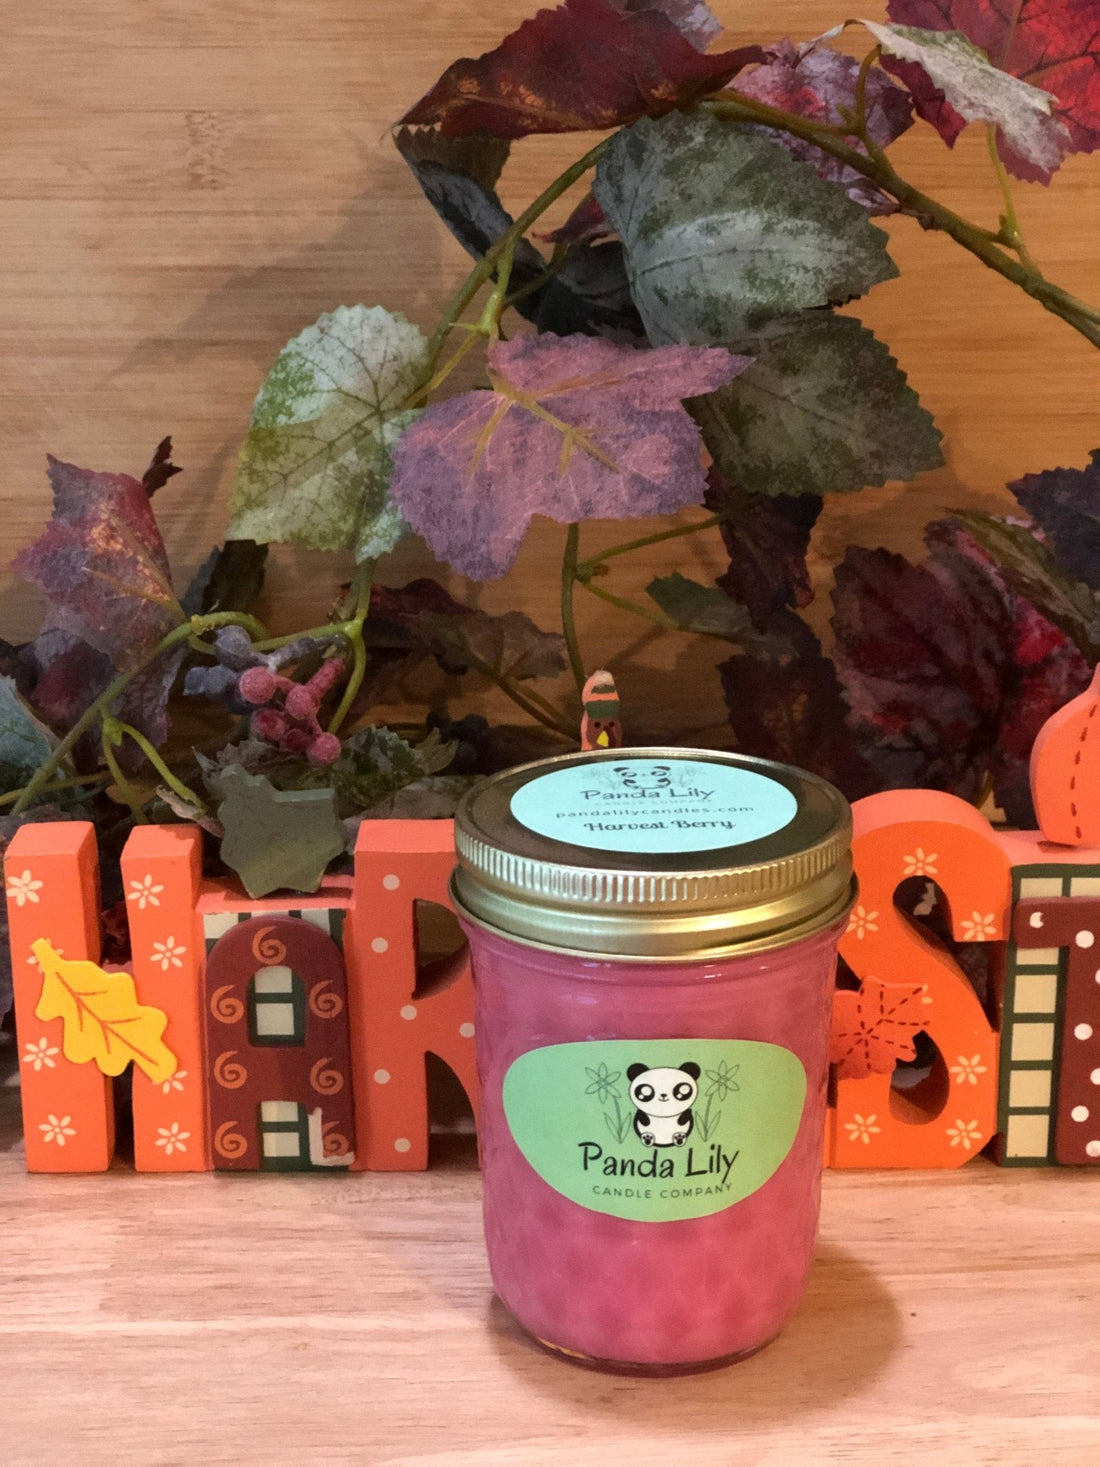 One of my new favorites—Harvest Berry - Panda Lily Candle Company